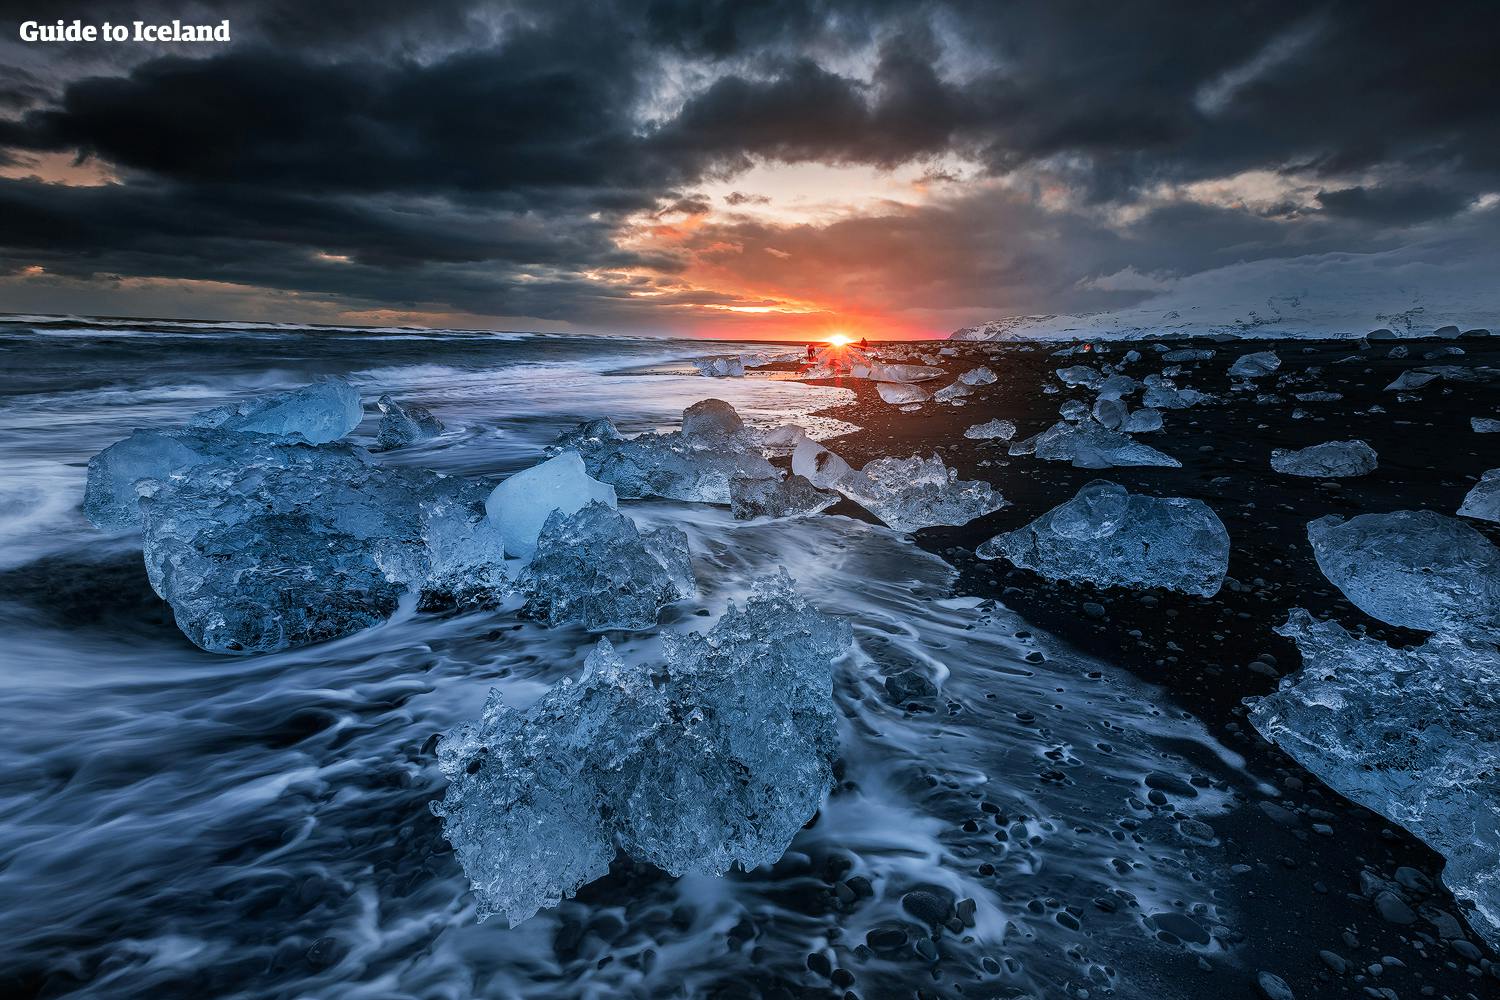 The Diamond Beach is a must see attraction on Iceland's South Coast.